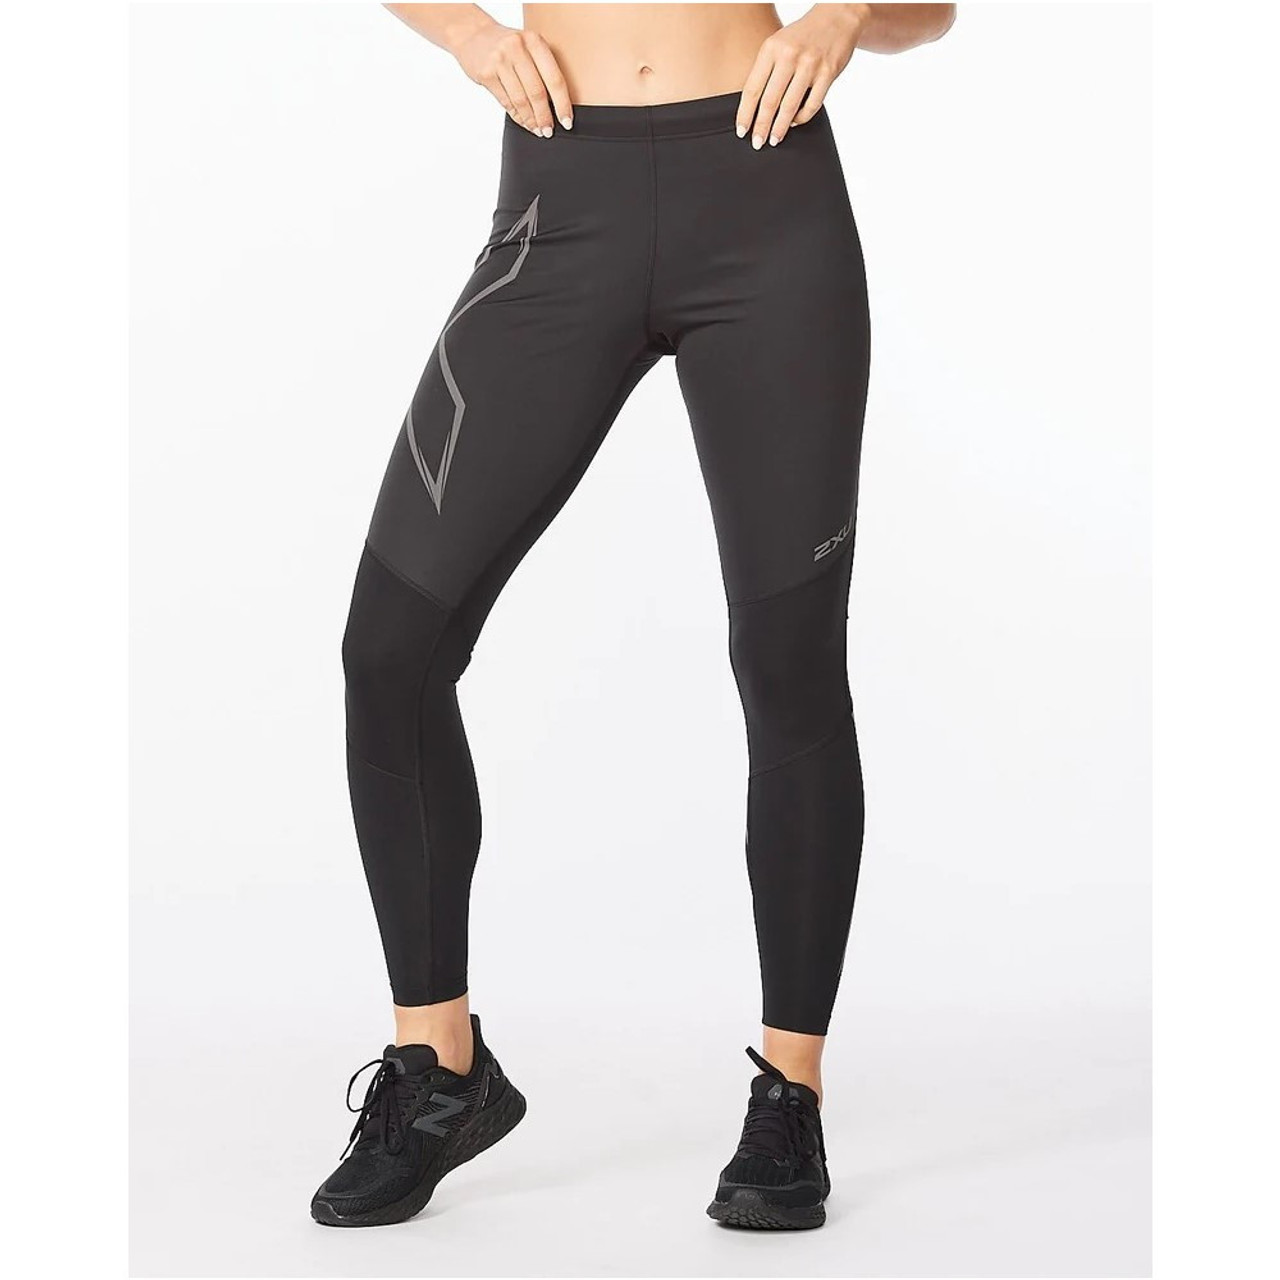 2XU Women's Ignition Shield Thermal Compression